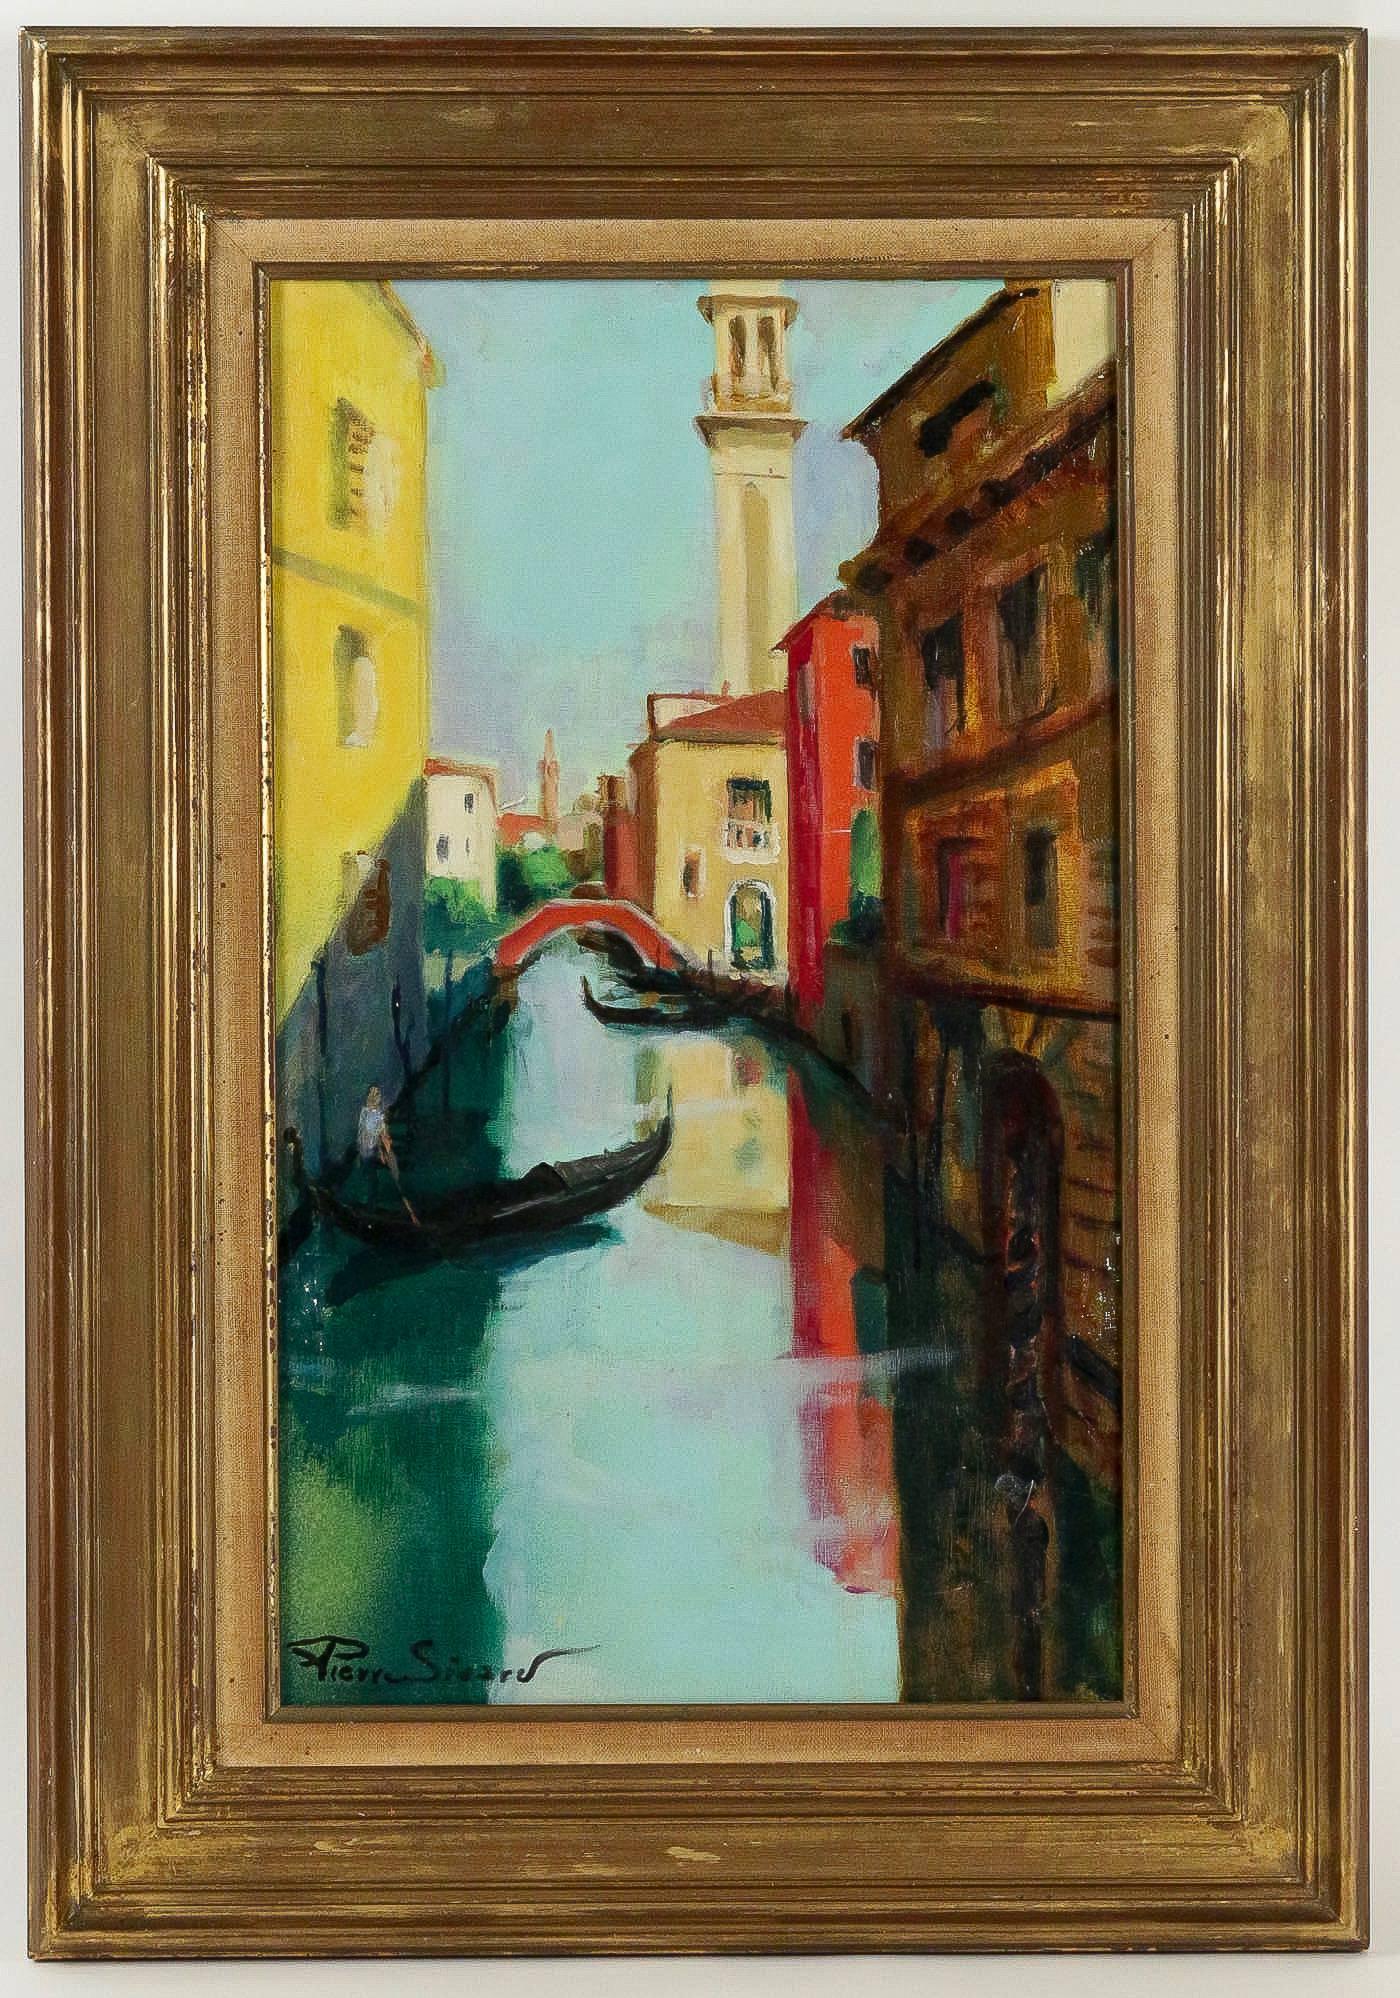 We are pleased to present you, a beautiful painting, depicting a View of Venice Bridge, sign in a lower left by Pierre Sicard in 1920.

Original giltwood-frame. Our painting is an excellent original condition.

Dimensions unframed: Width 13.38